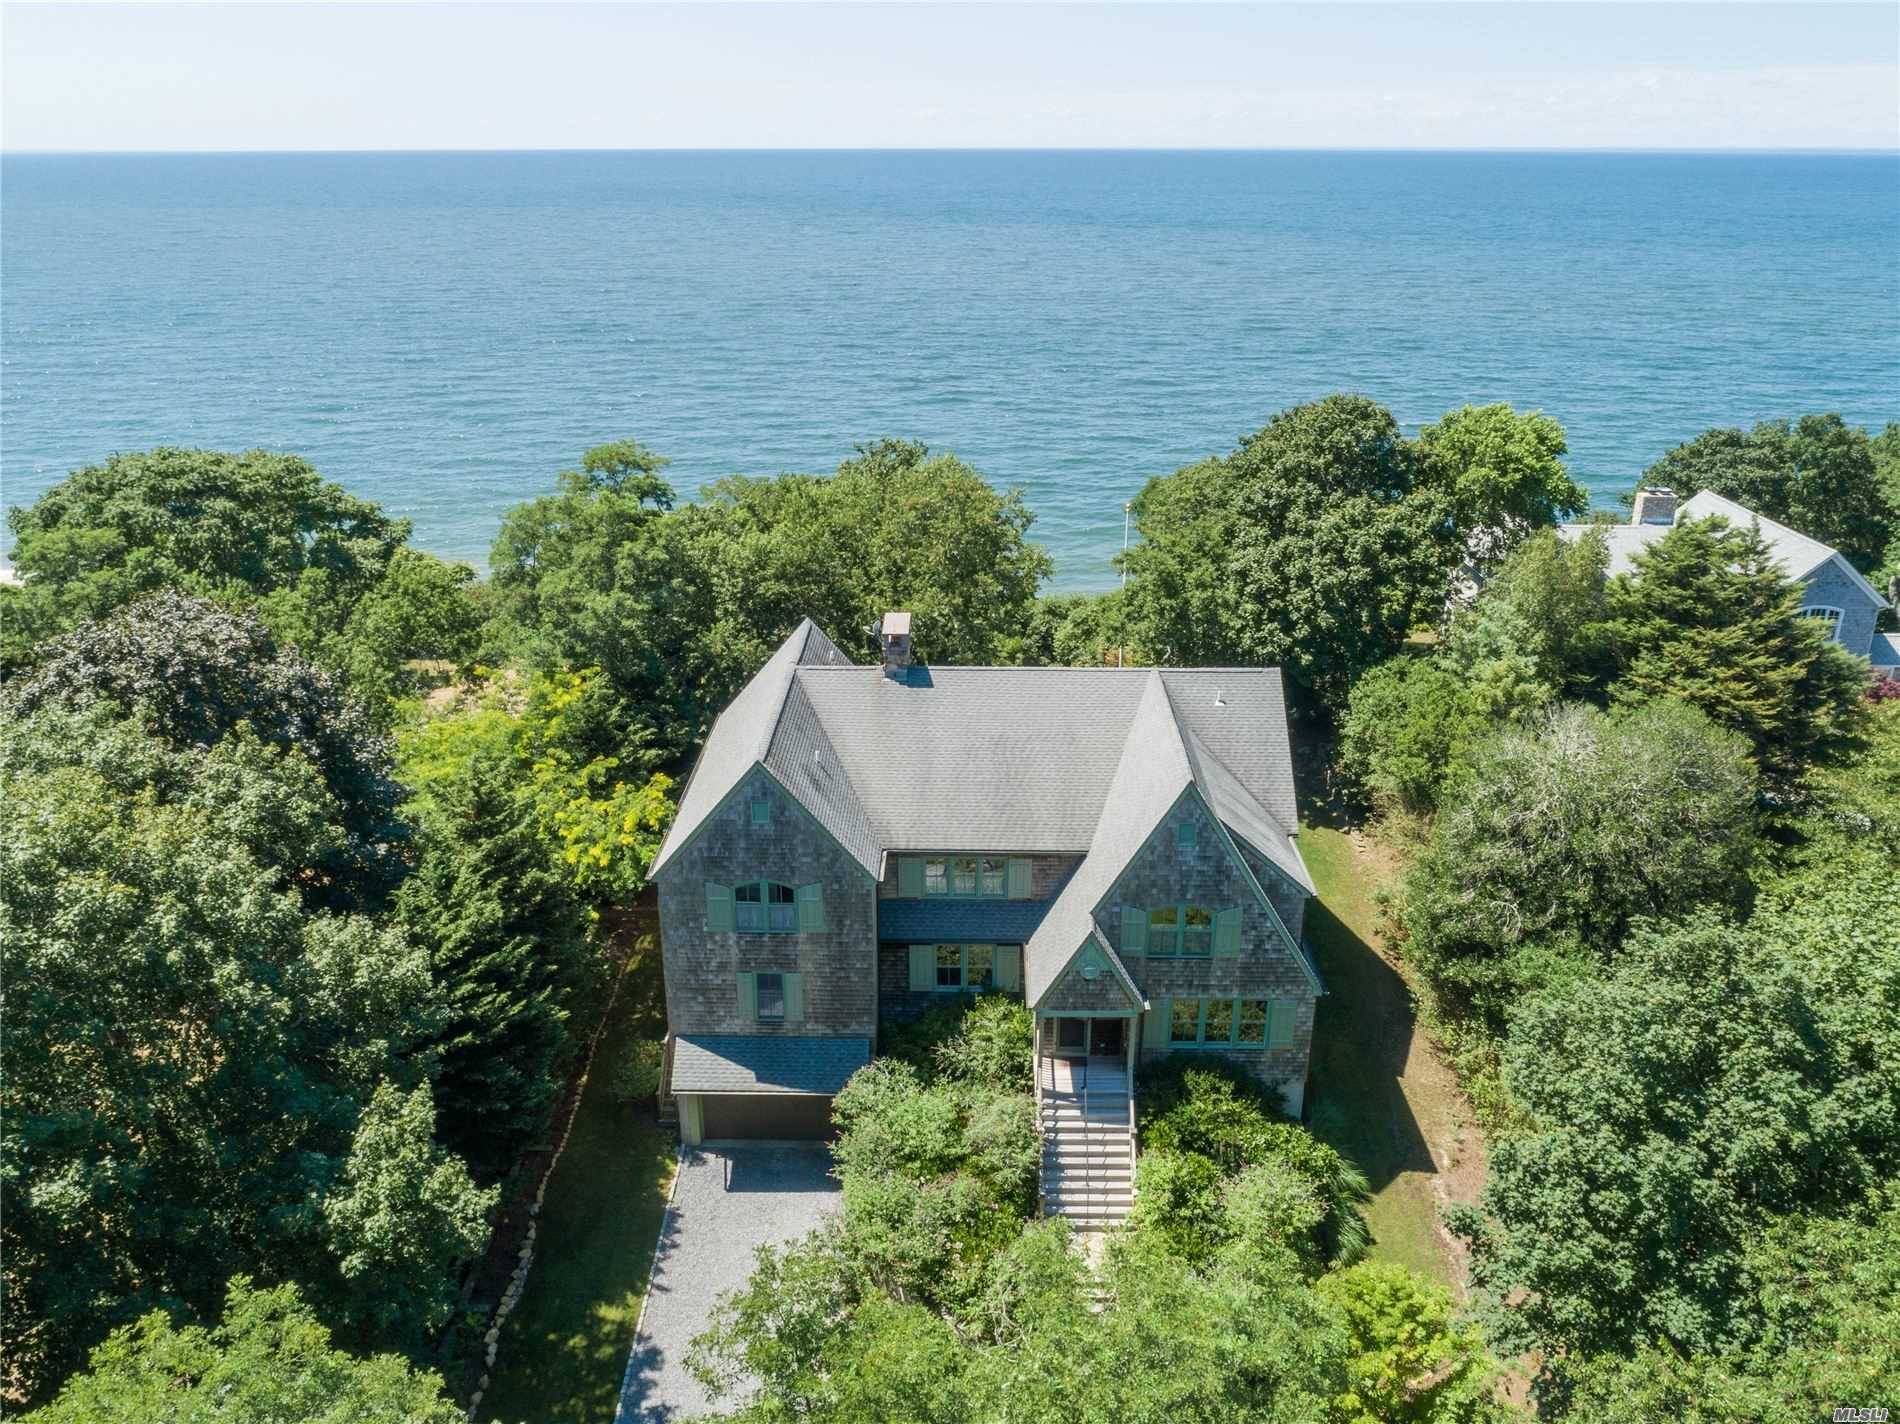 Down a winding country lane high on a bluff is this majestic 6365 sf sound front home with panoramic views to Connecticut.